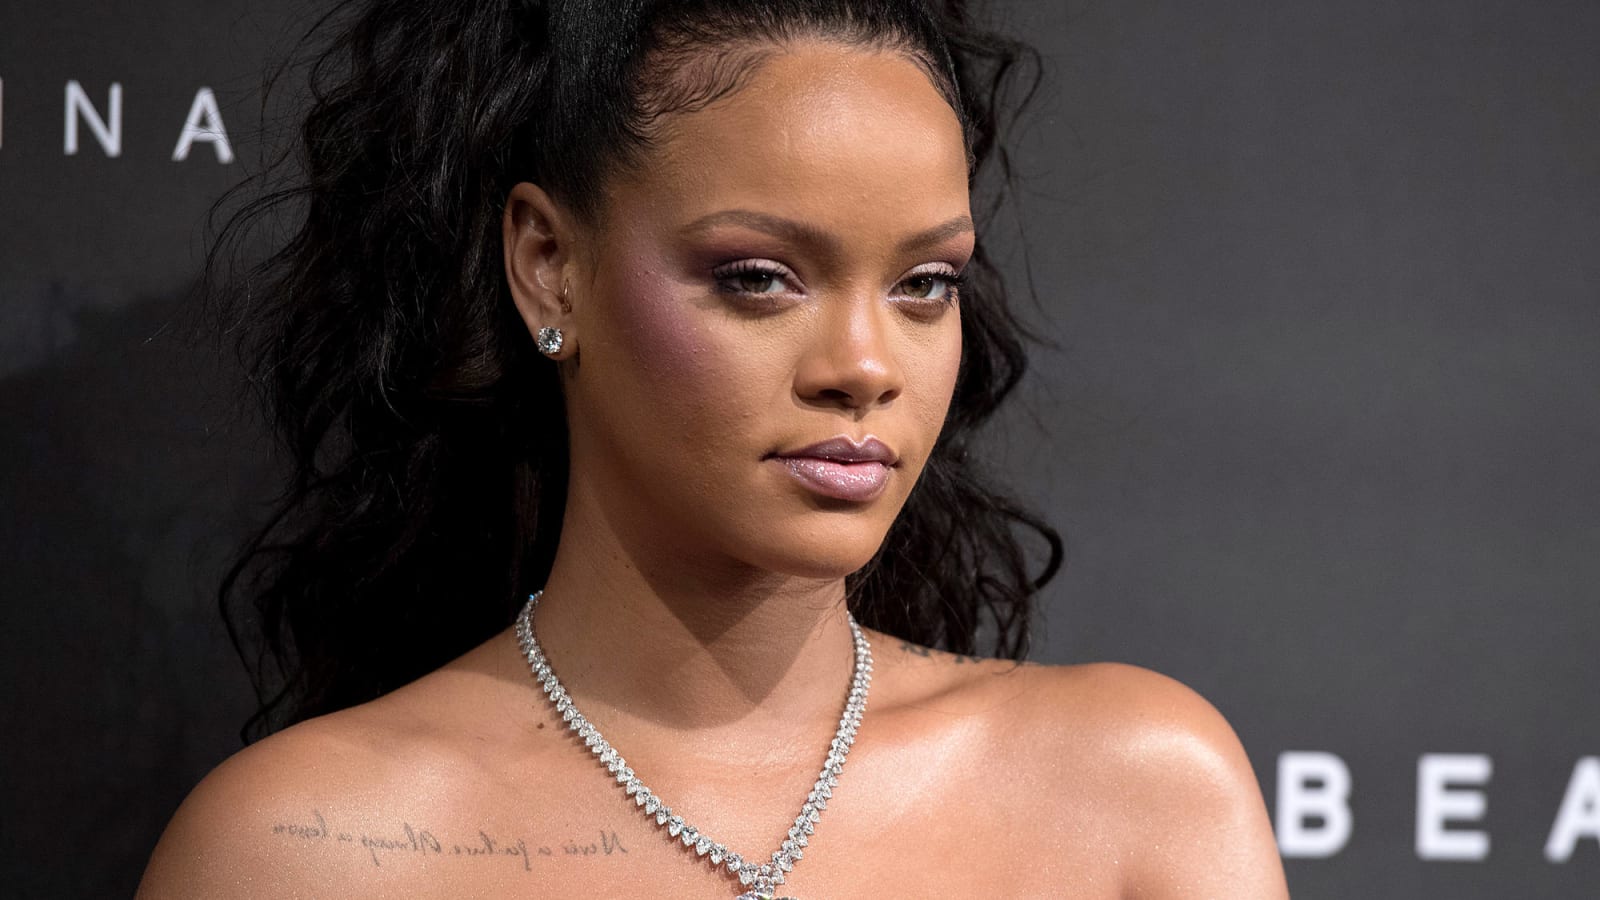 Not inspired by Rihanna yet? Everything she's accomplished before turning 30